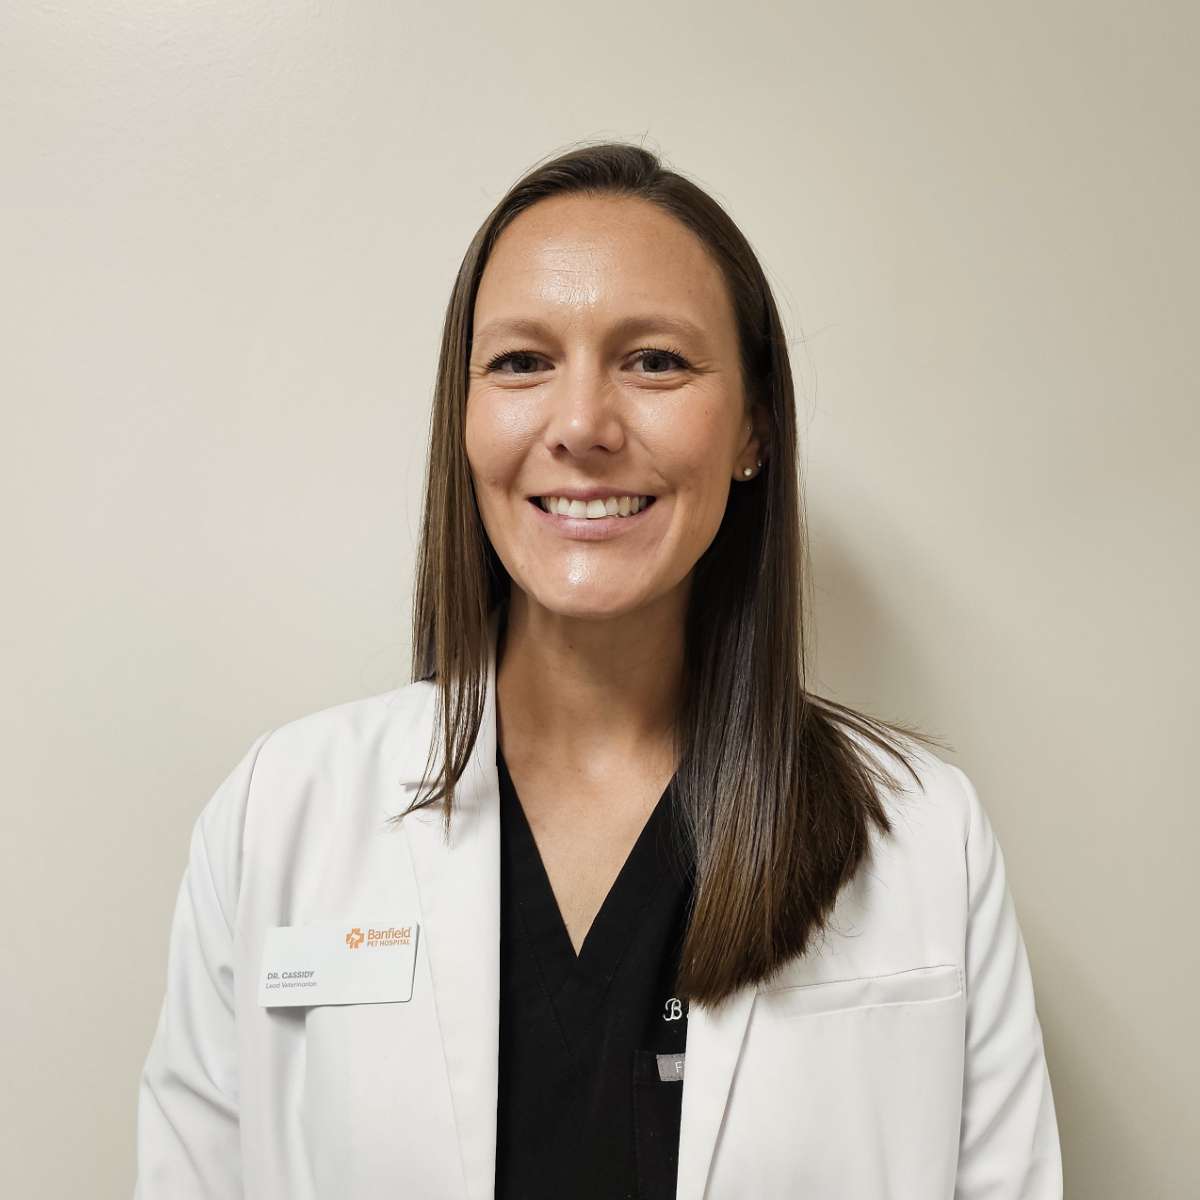 Profile picture of Brittany Cassidy, DVM, Veterinarian